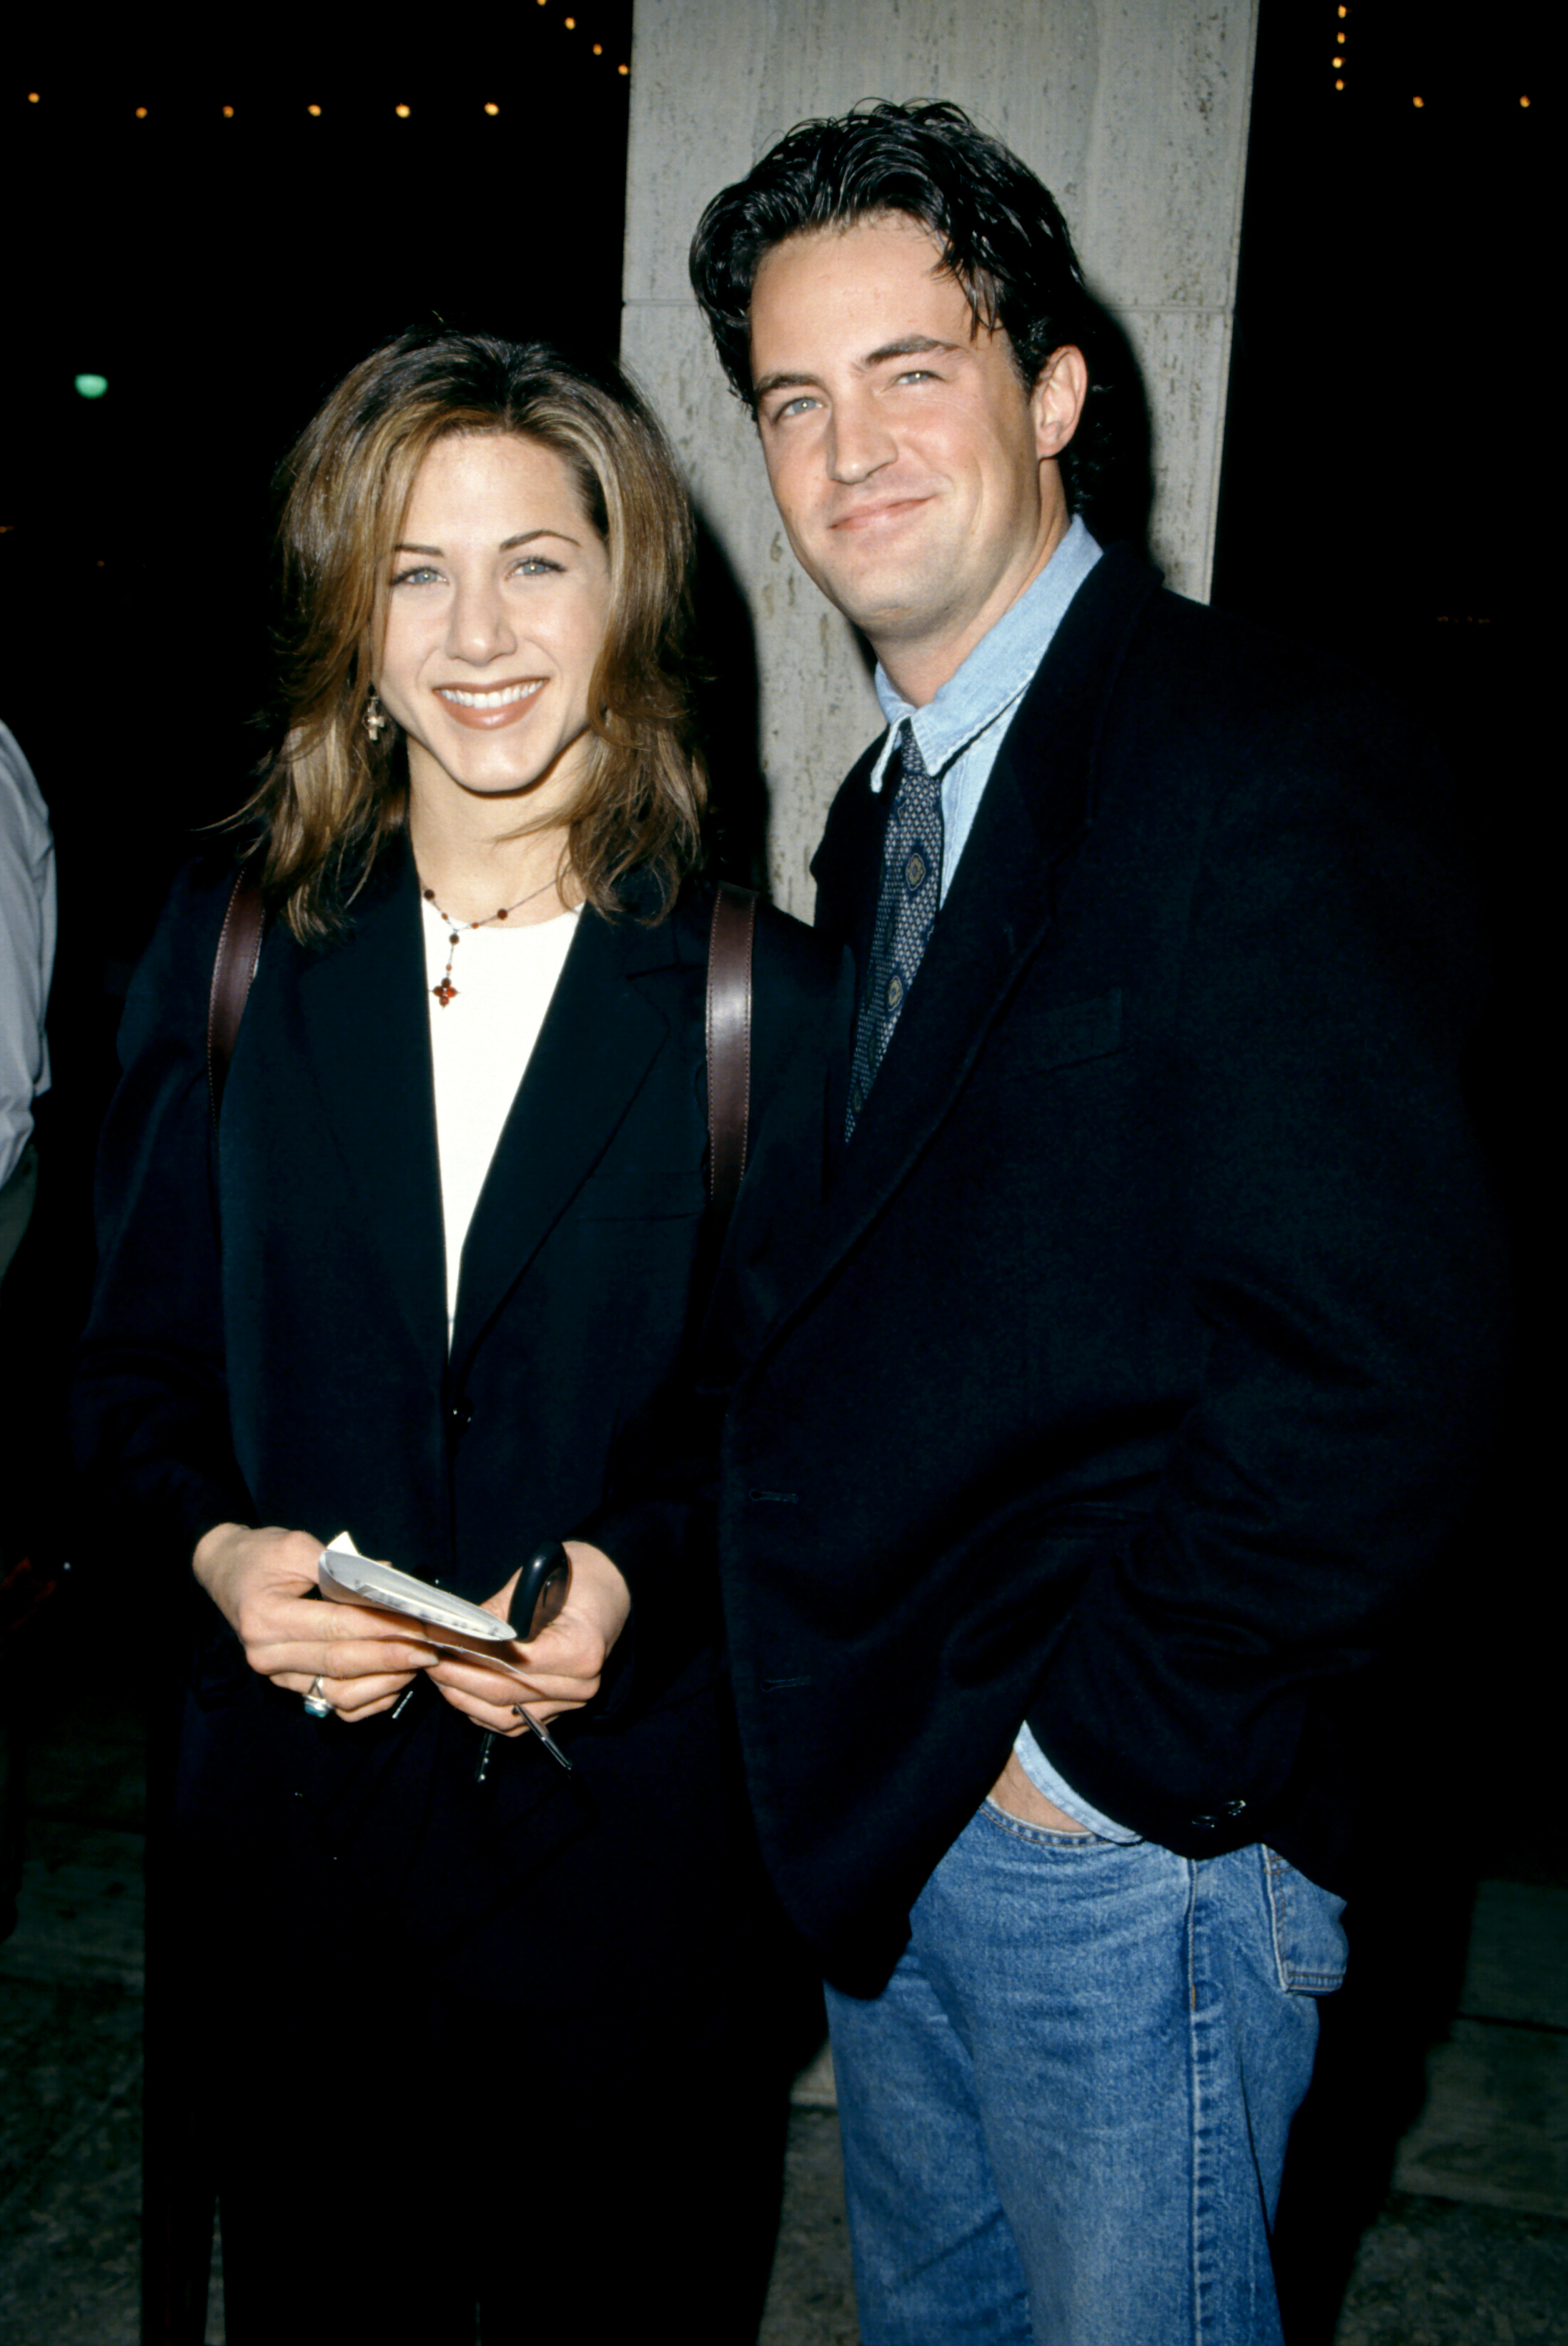 Jennifer Aniston and Matthew Perry during the Screening of the NBC Original Movie "Serving in Silence: The Margarethe Cammermeyer Story" on January 23, 1995 in Century City, California | Source: Getty Images